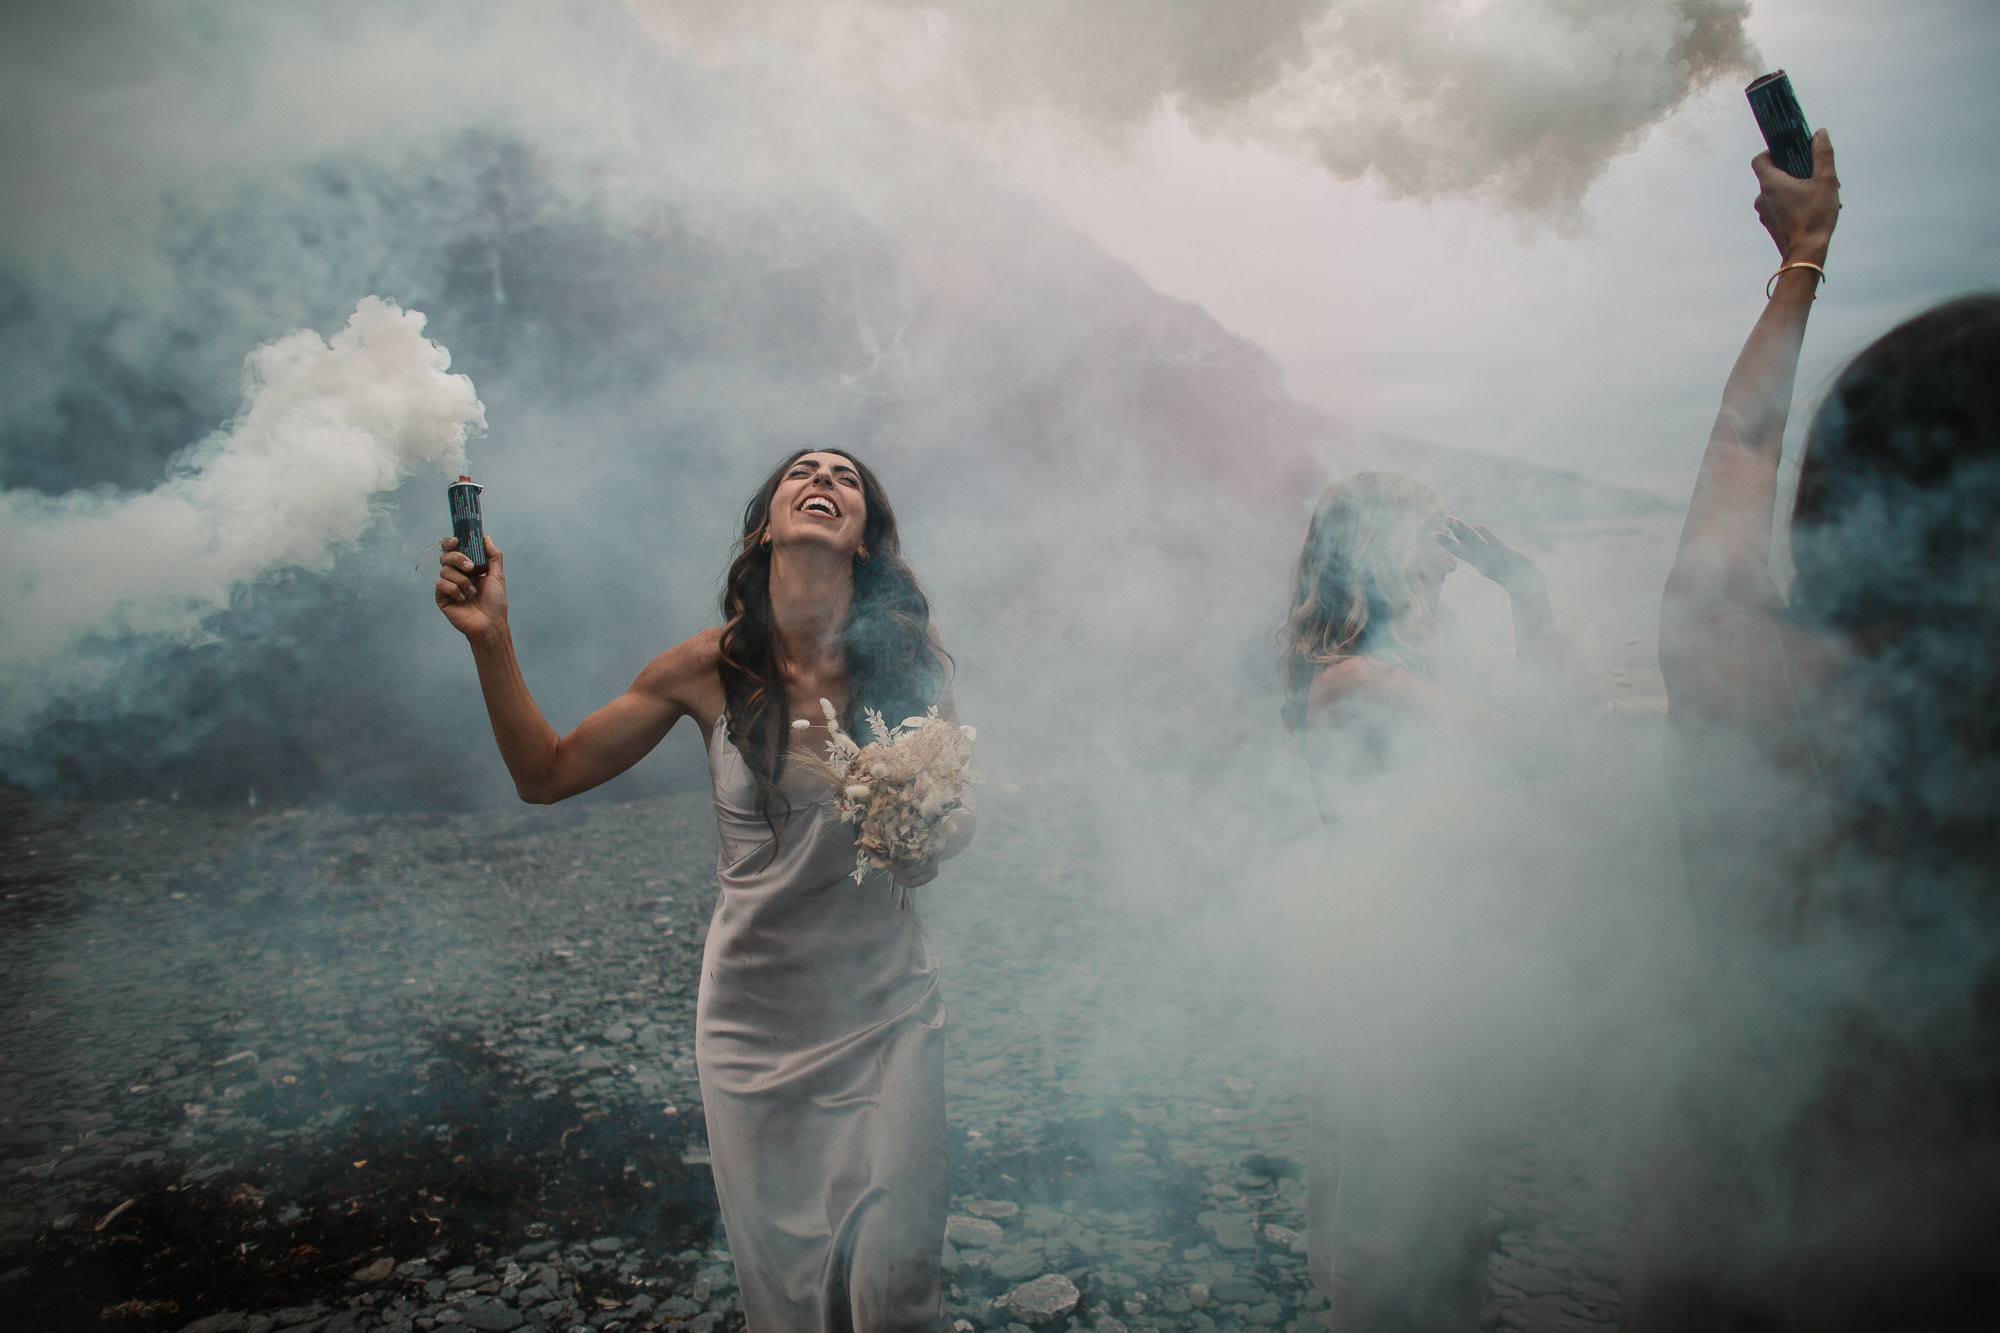 bridesmaid in the middle of the smoke laughing looking up